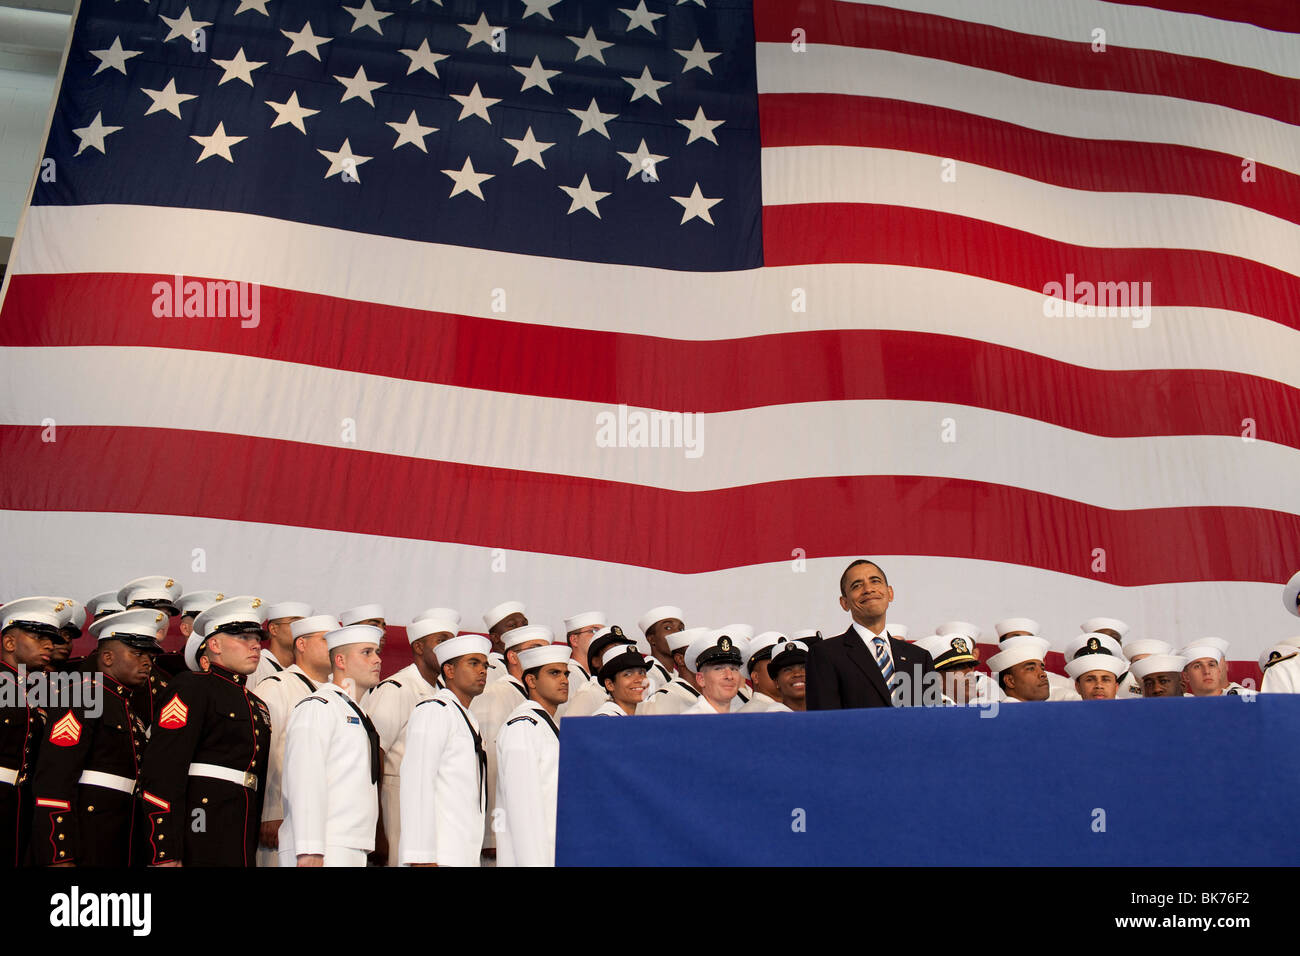 President Barack Obama stands on stage prior to delivering remarks to servicemen and women at Naval Air Station Jacksonville, FL Stock Photo